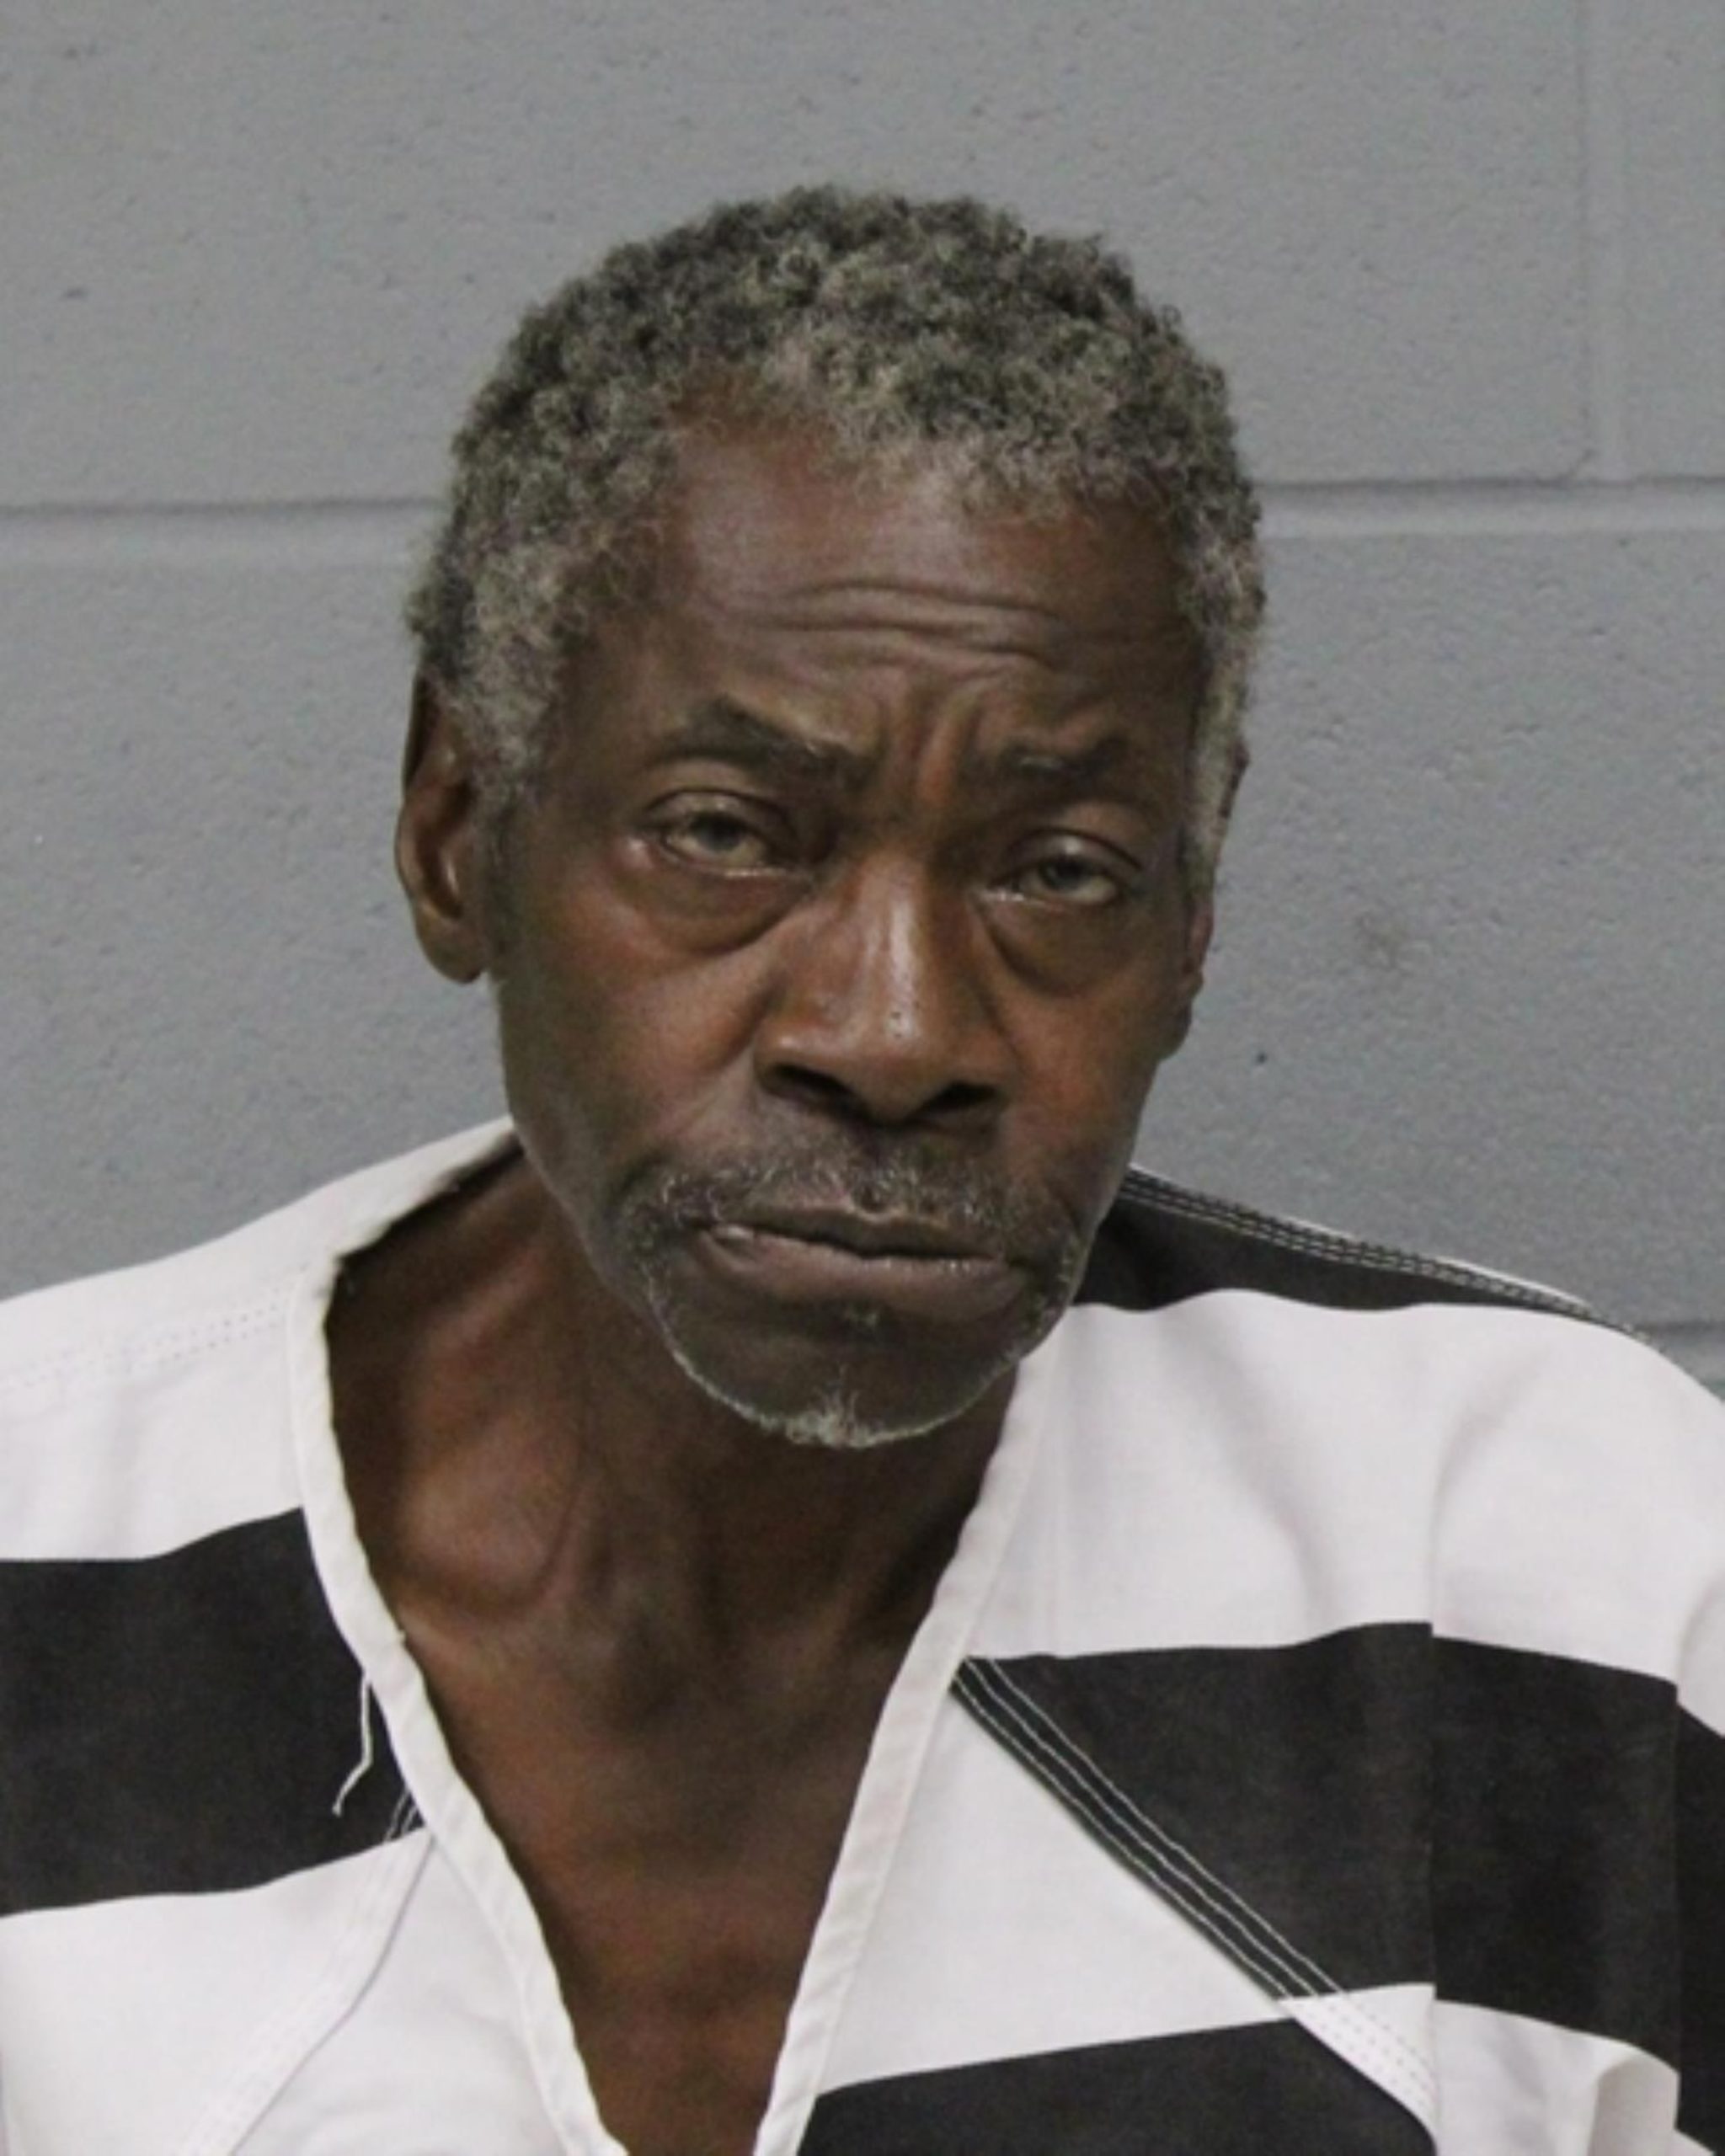 62-year-old suspect attacks man using wheelchair, resulting in fatal injuries